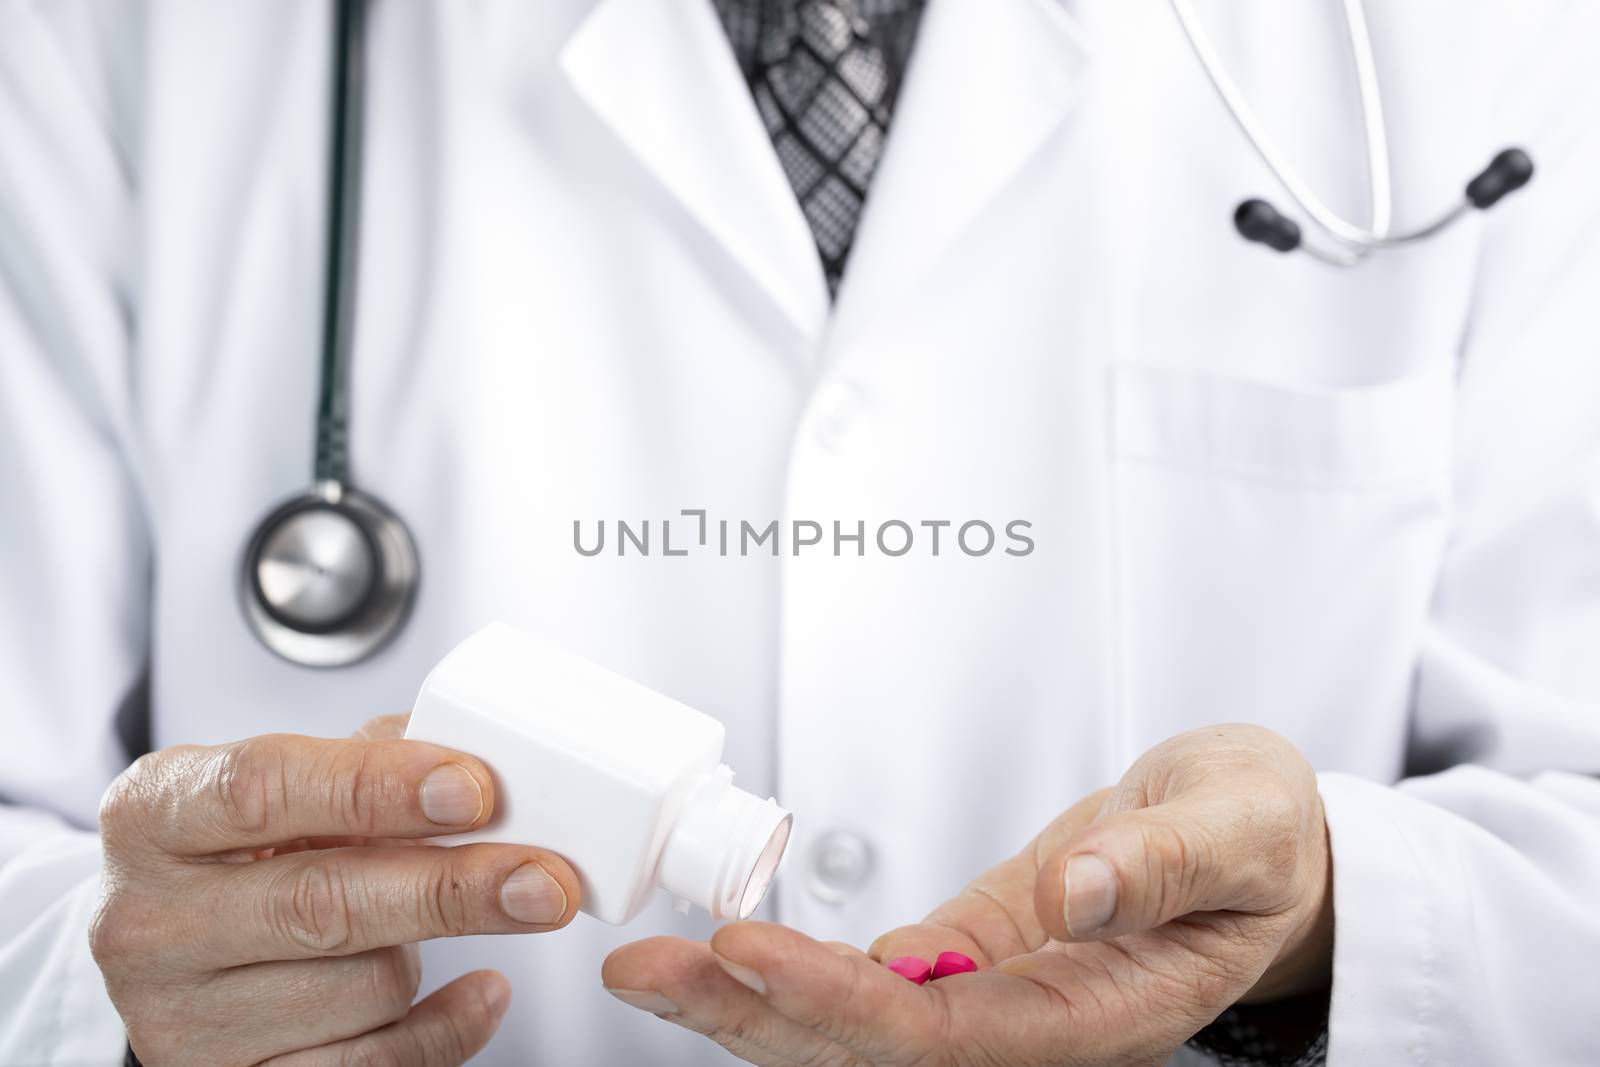 A male doctor taking pills from a white plastic prescription bottle or container Medical administration concept. Asian ethnicity.